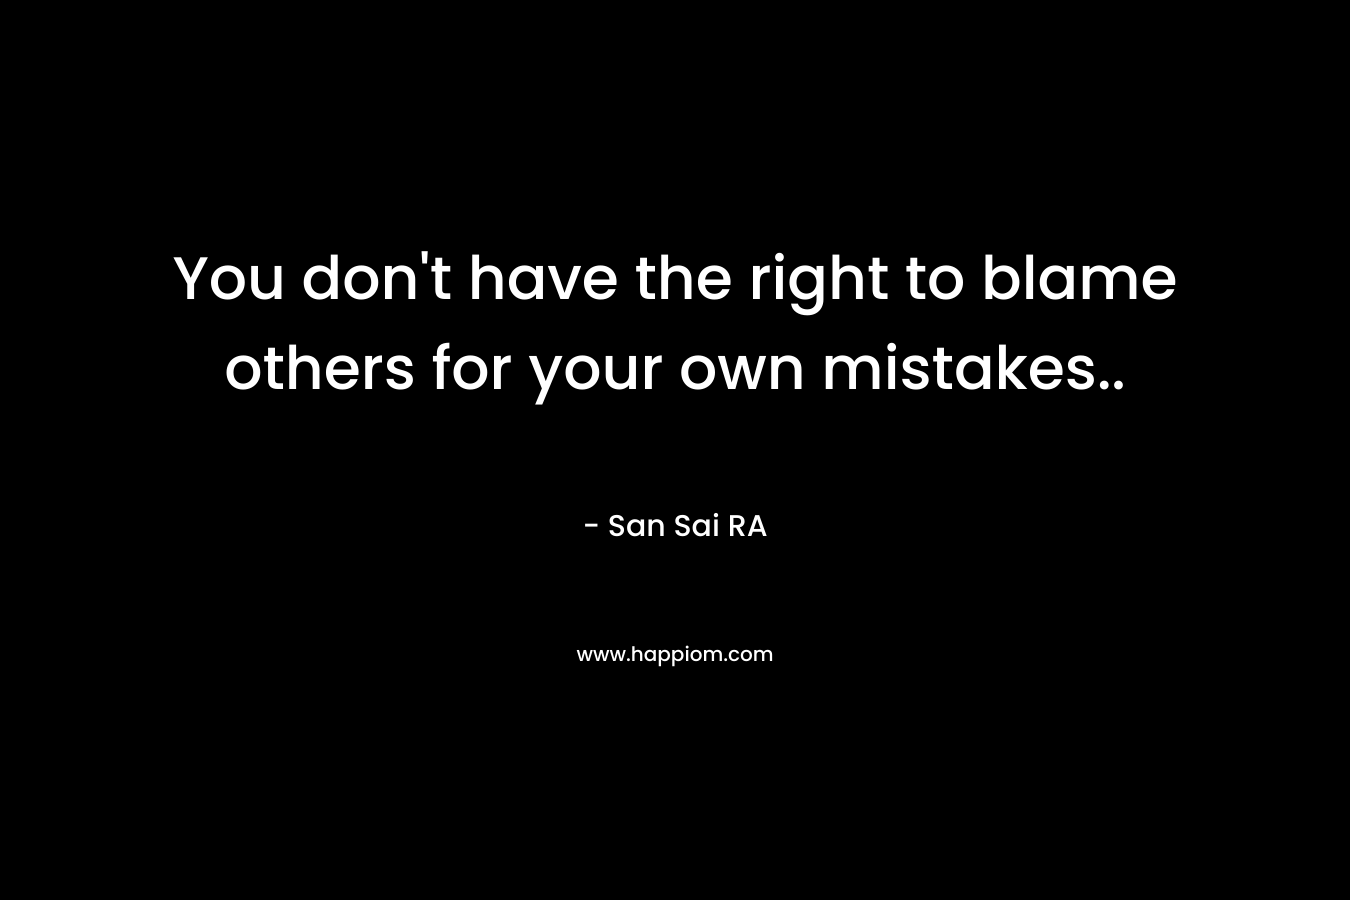 You don't have the right to blame others for your own mistakes..